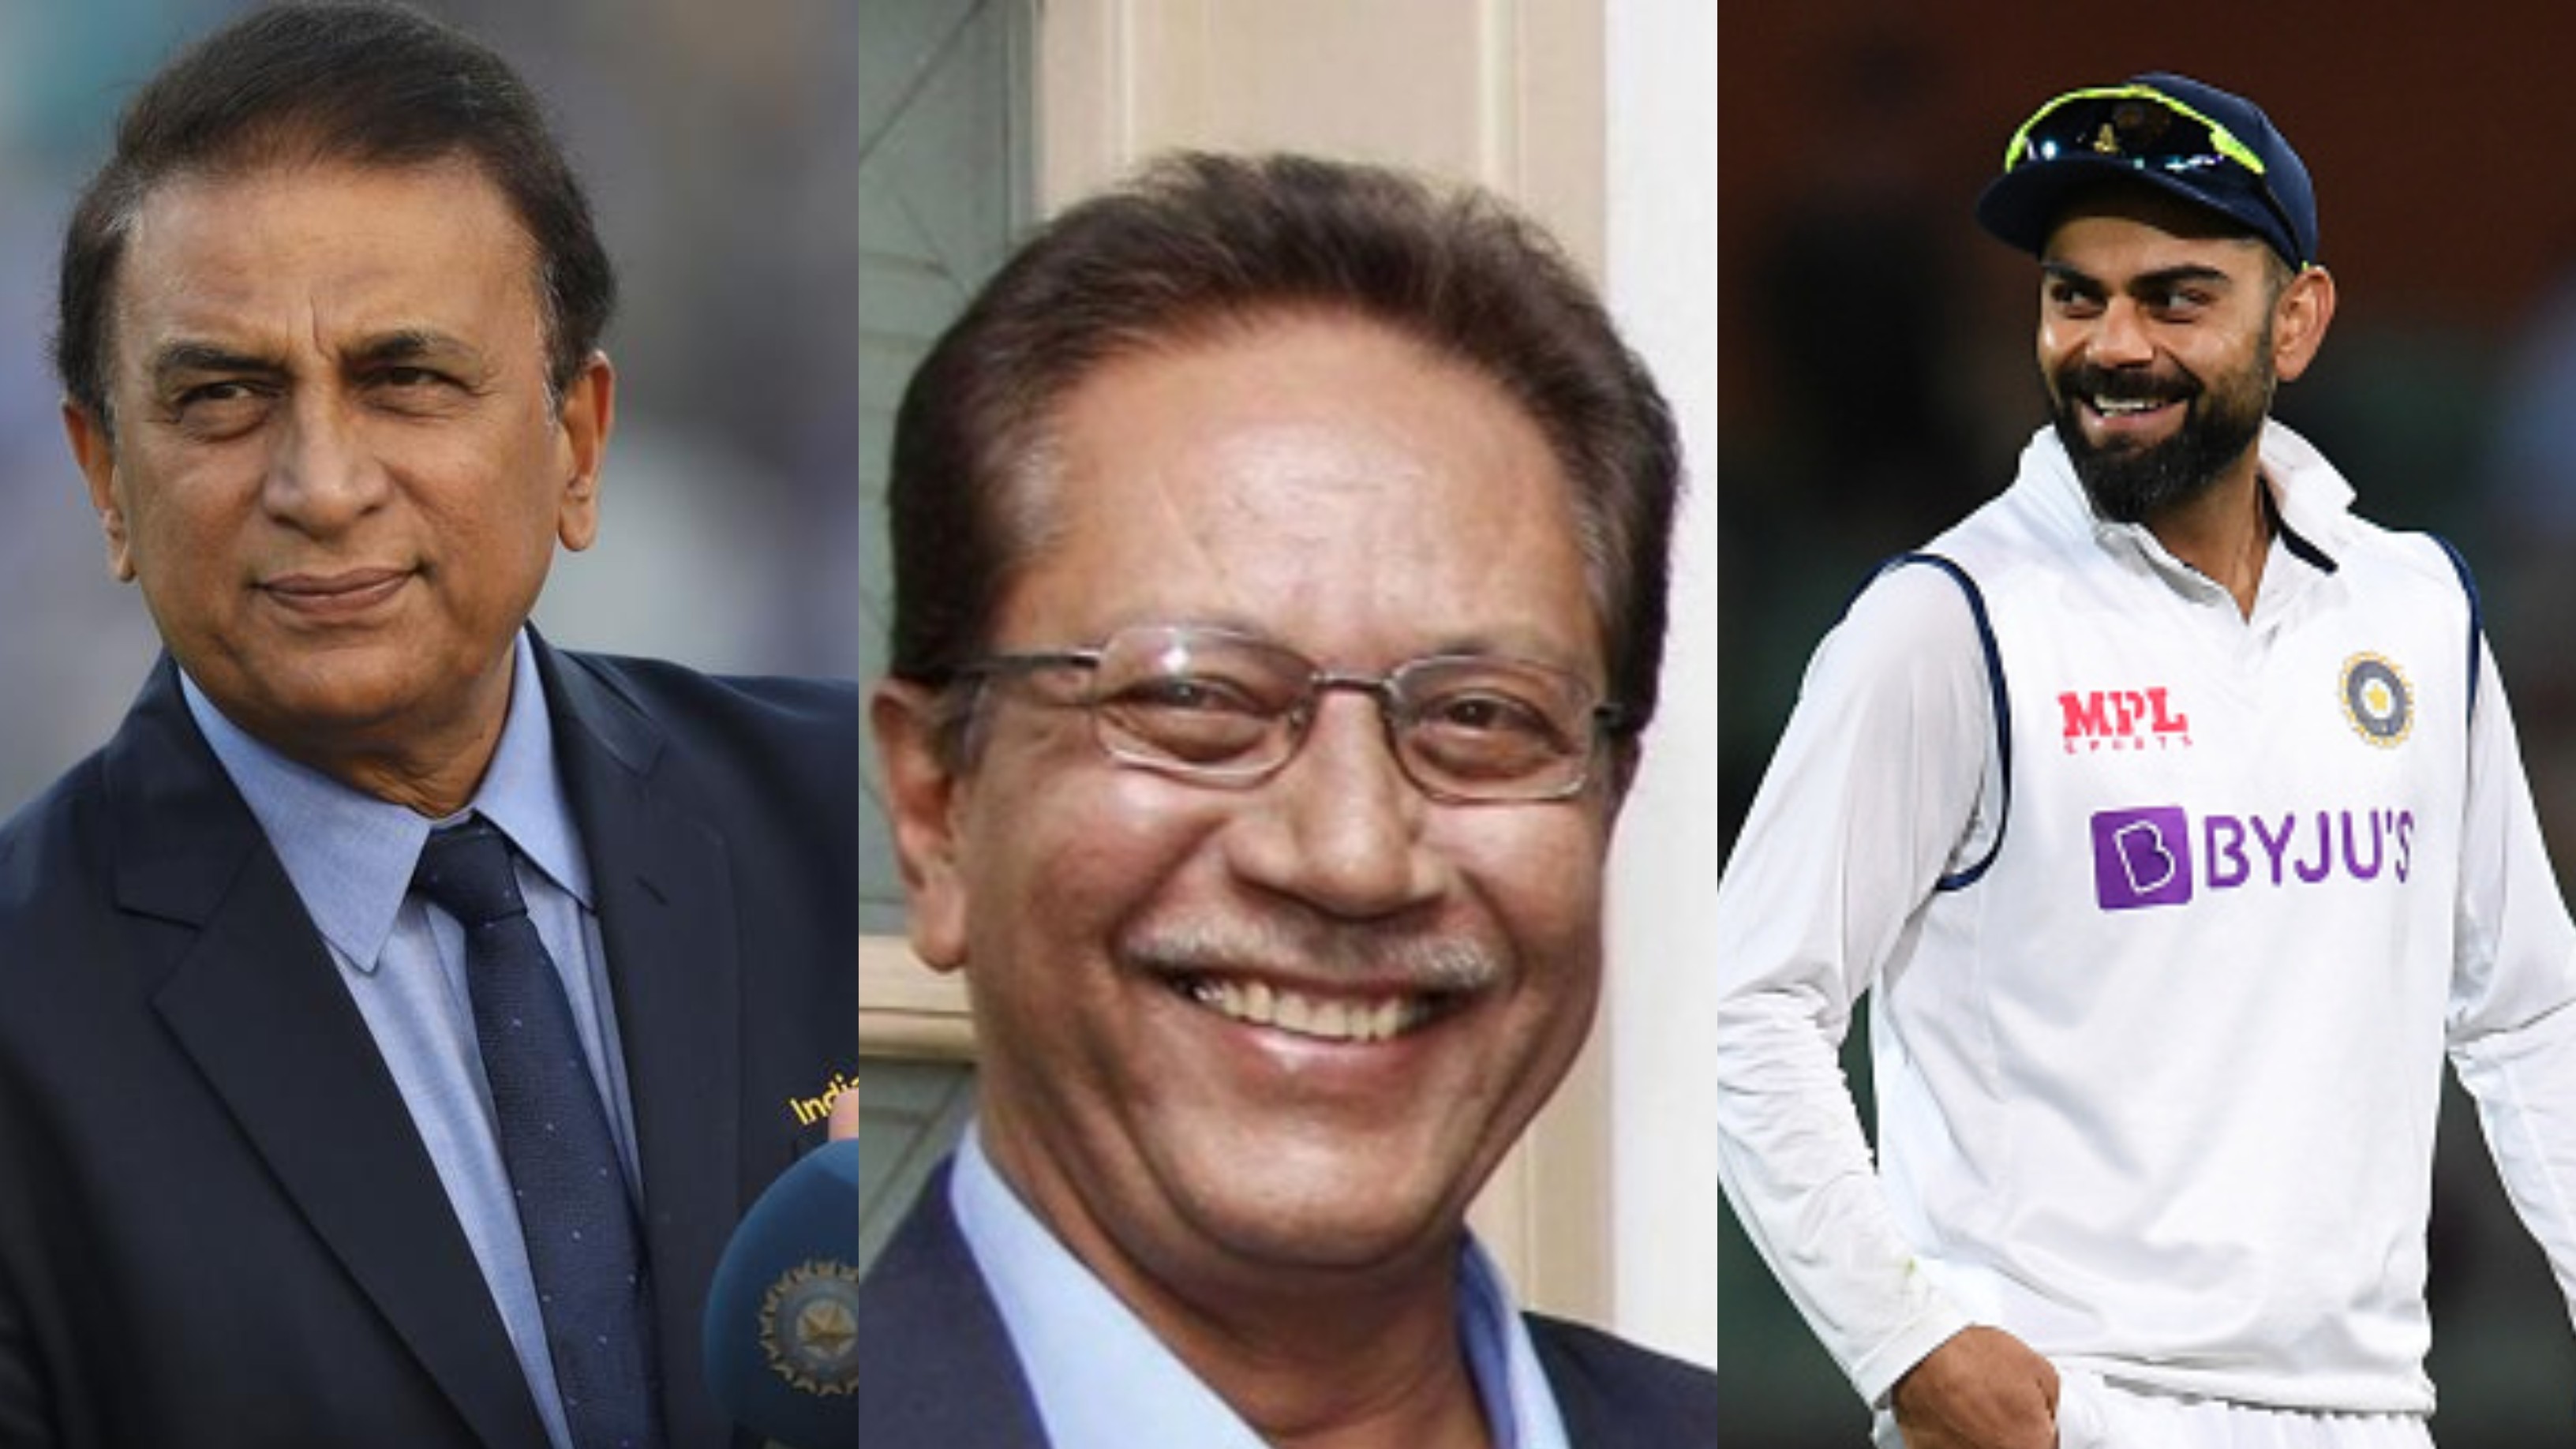 AUS v IND 2020-21: Gavaskar wanted to go home scared of West Indian bouncers, says Gaekwad